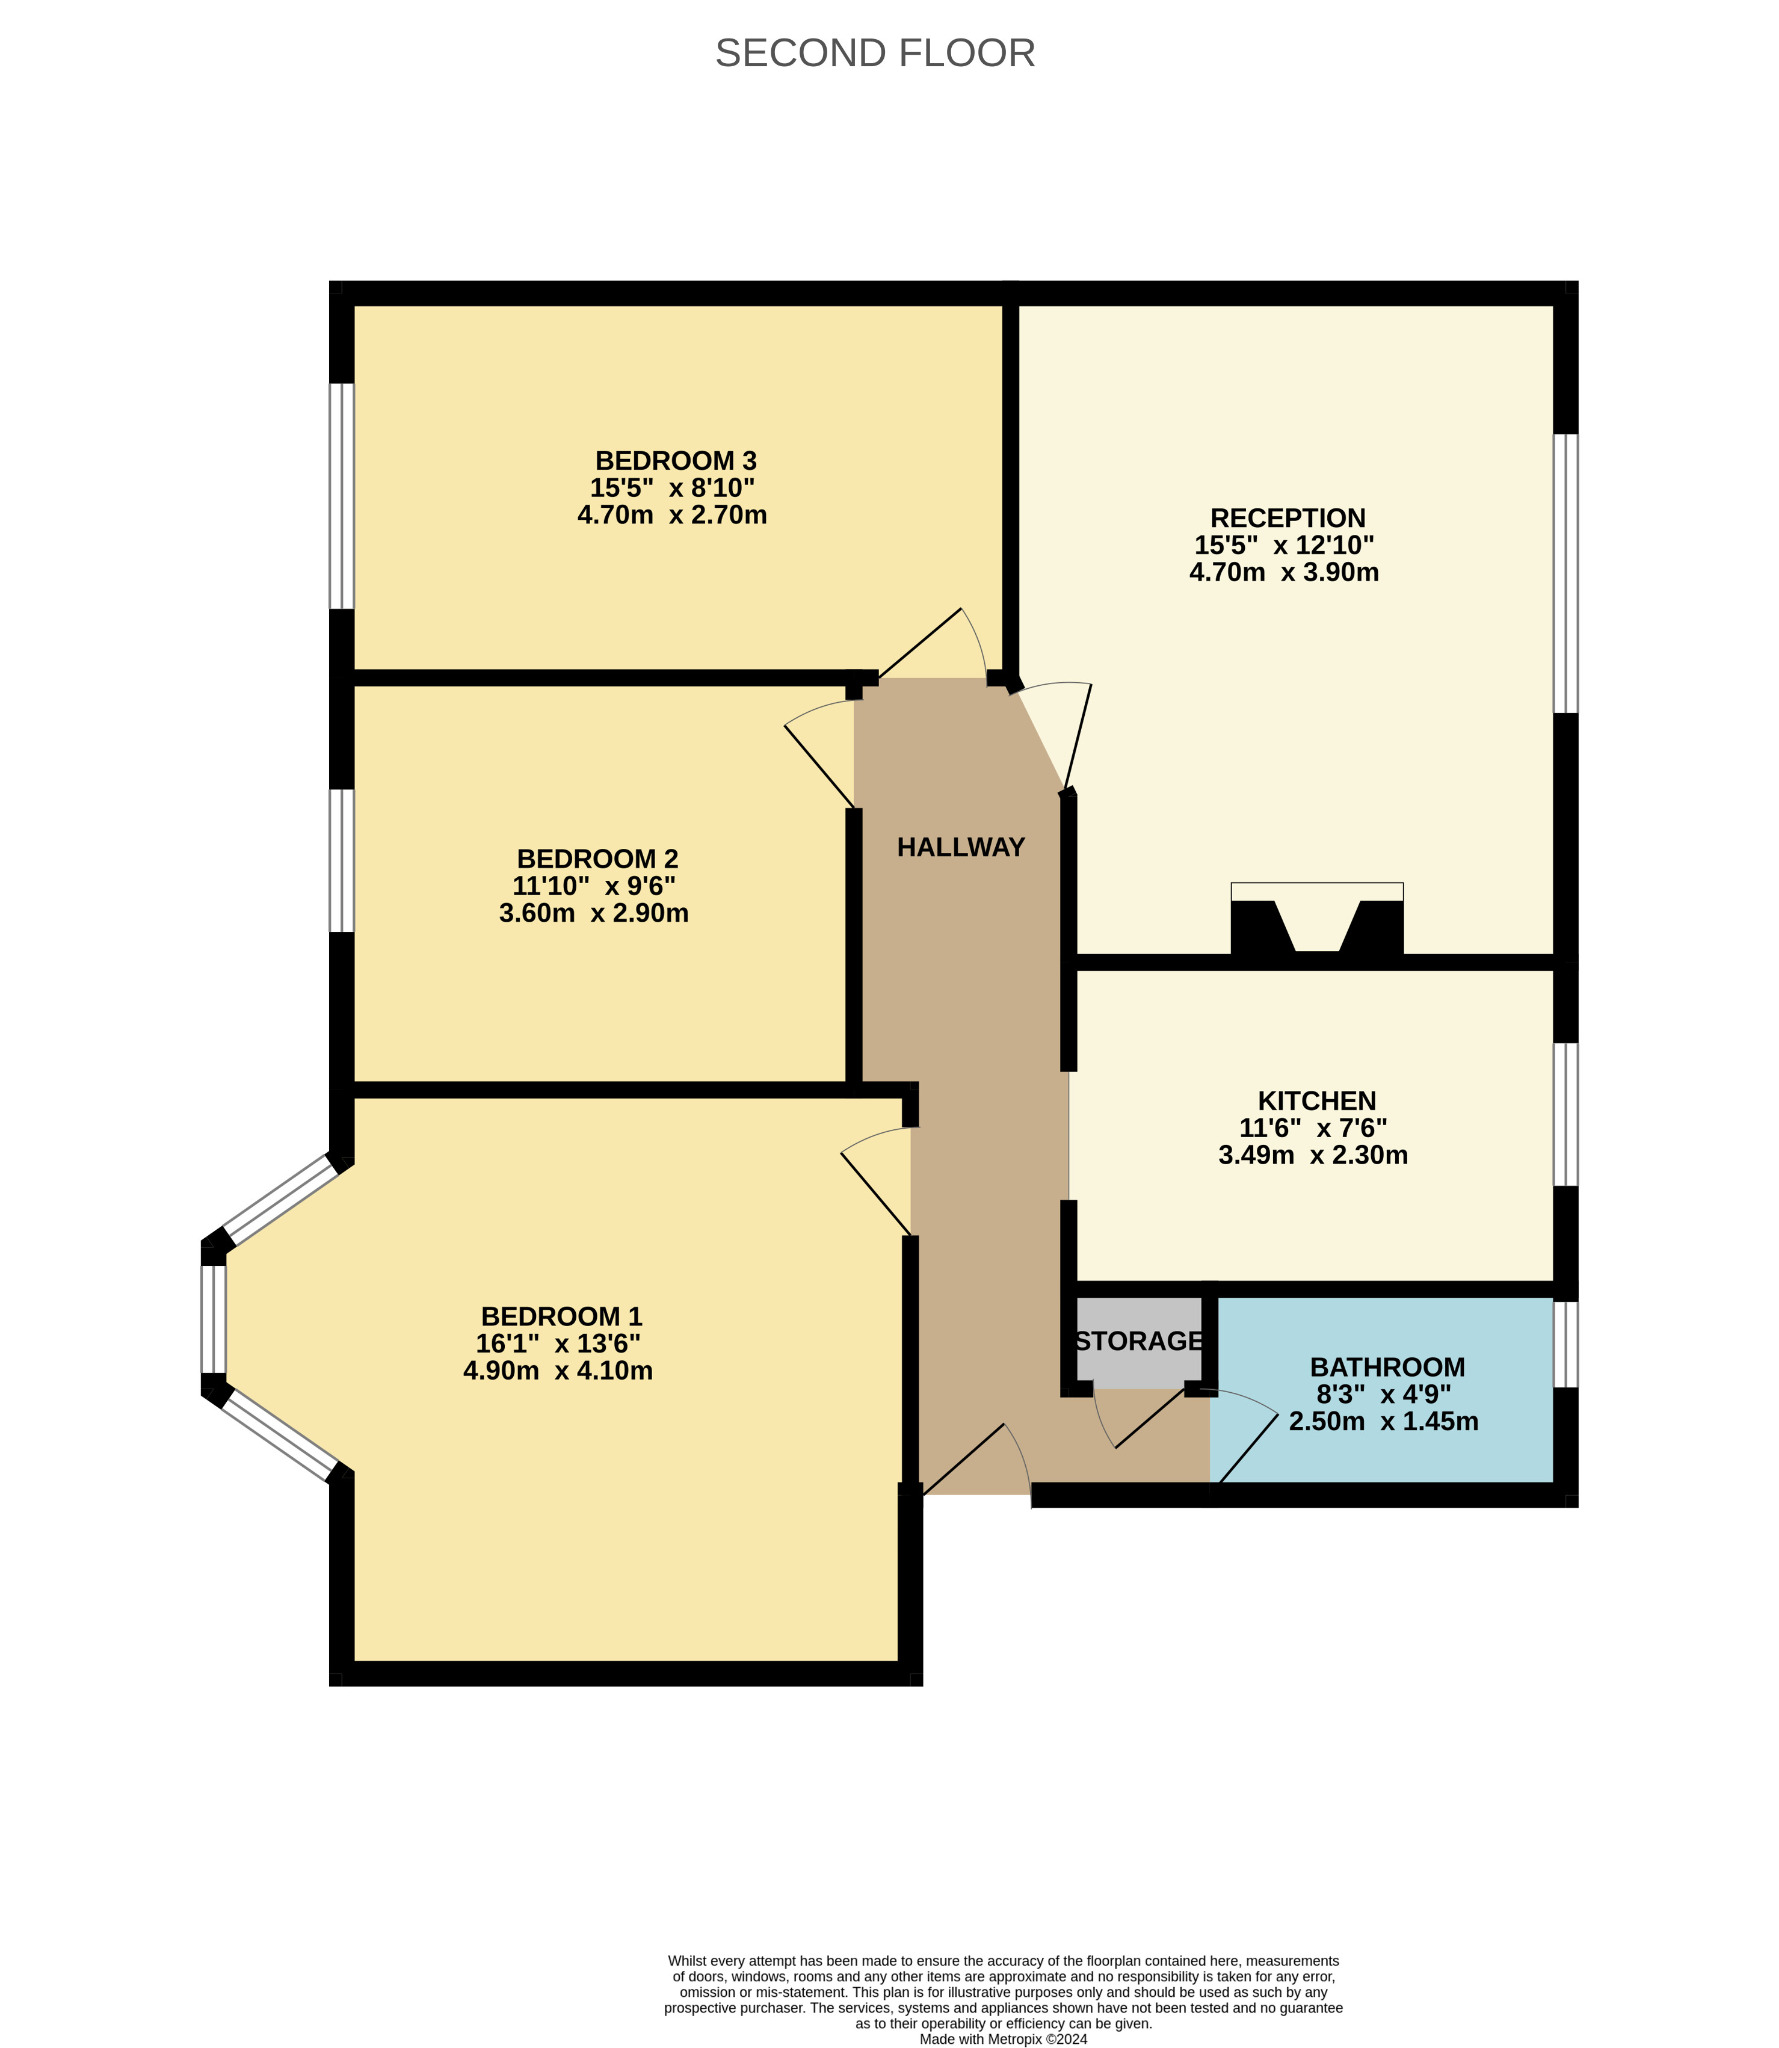 3 bed flat for sale in Summertown Road, Glasgow - Property floorplan